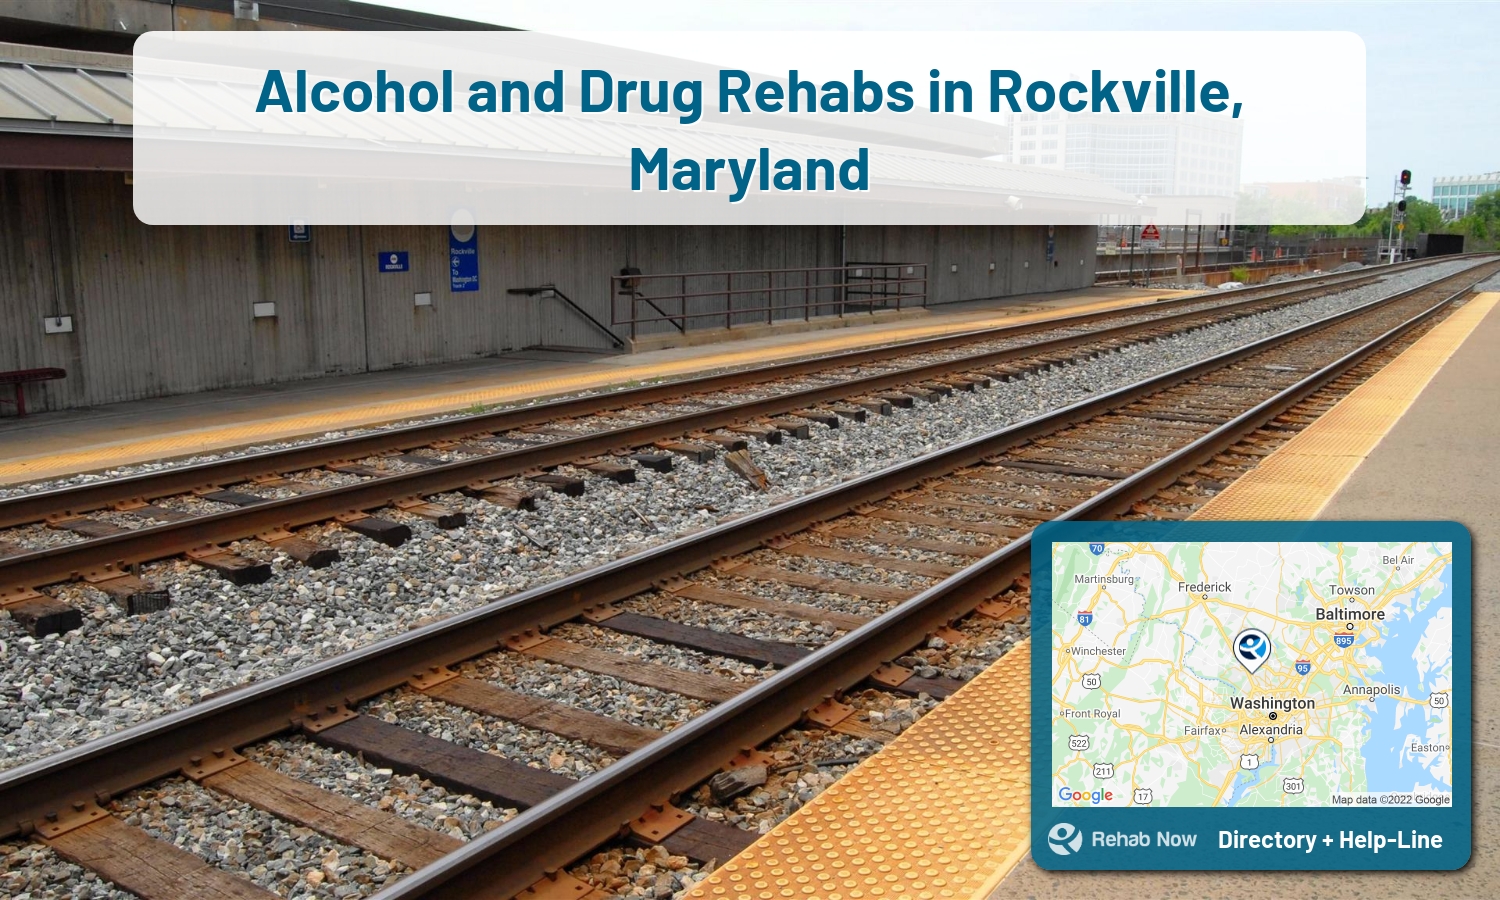 Rockville, MD Treatment Centers. Find drug rehab in Rockville, Maryland, or detox and treatment programs. Get the right help now!